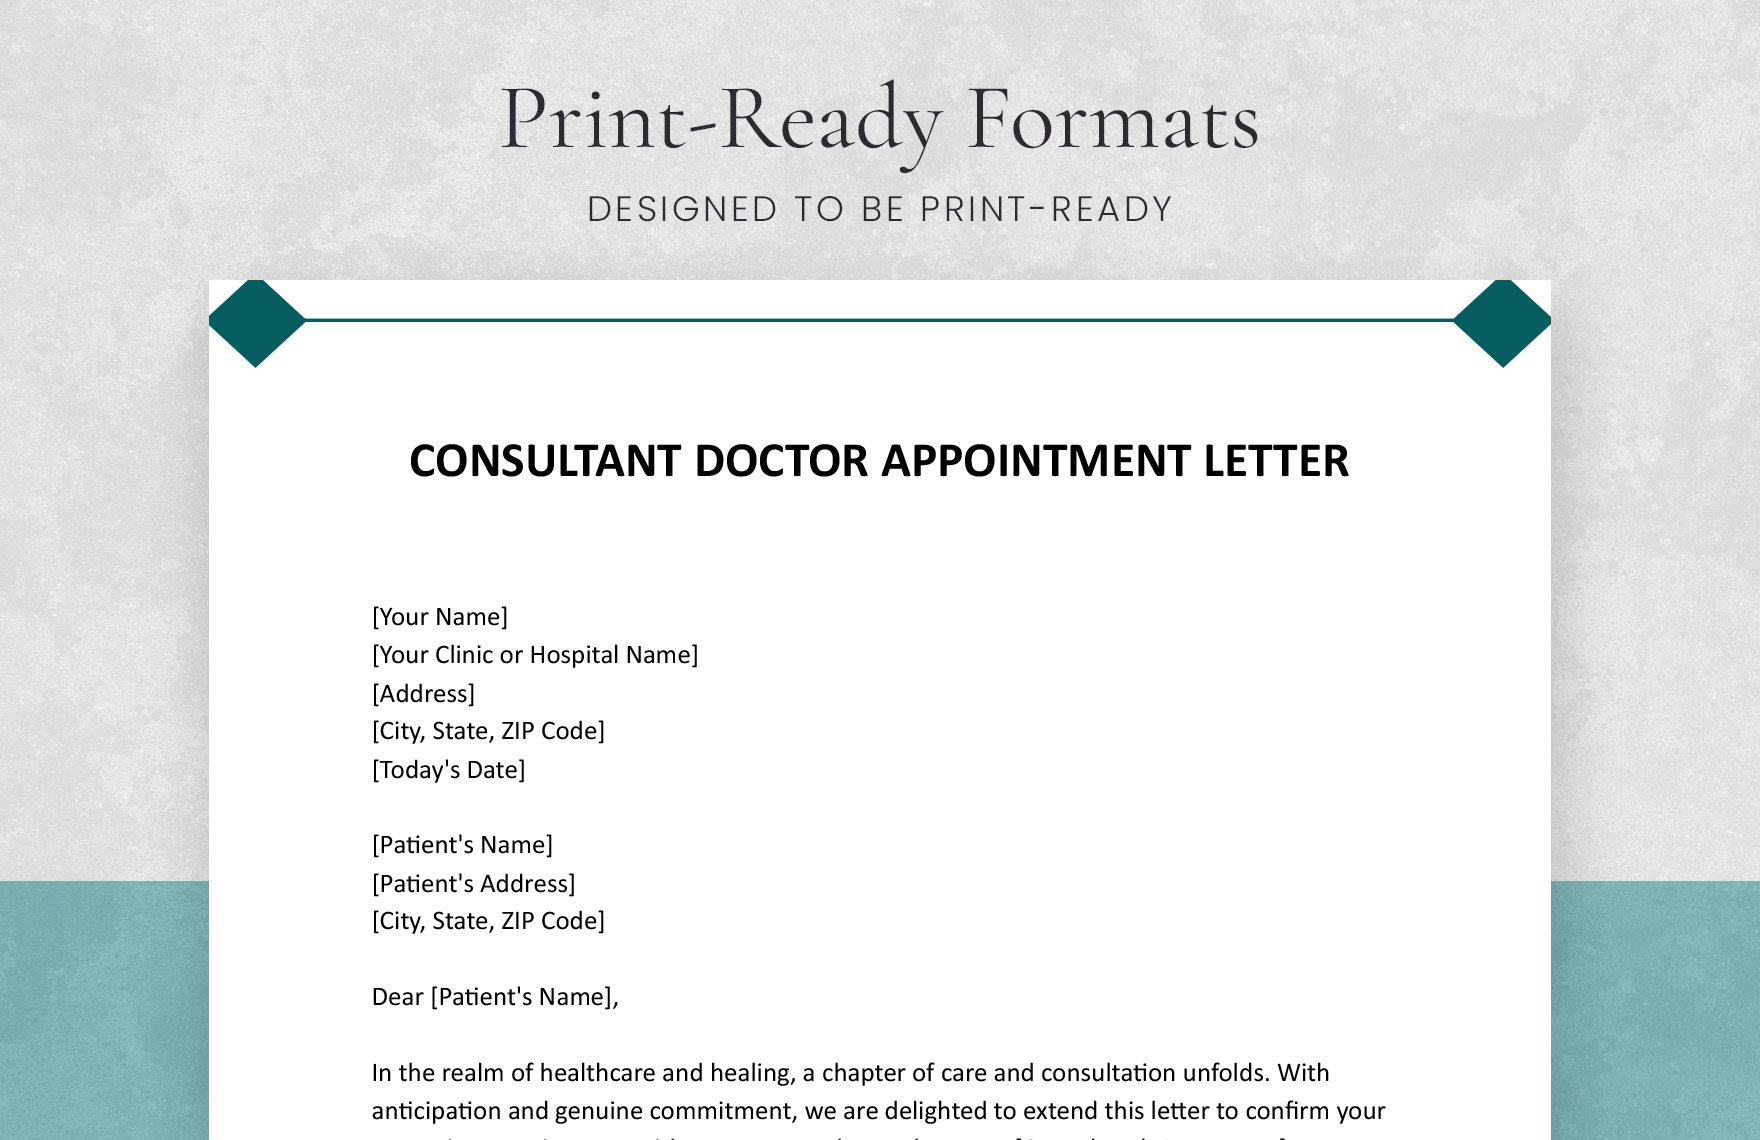 Consultant Doctor Appointment Letter